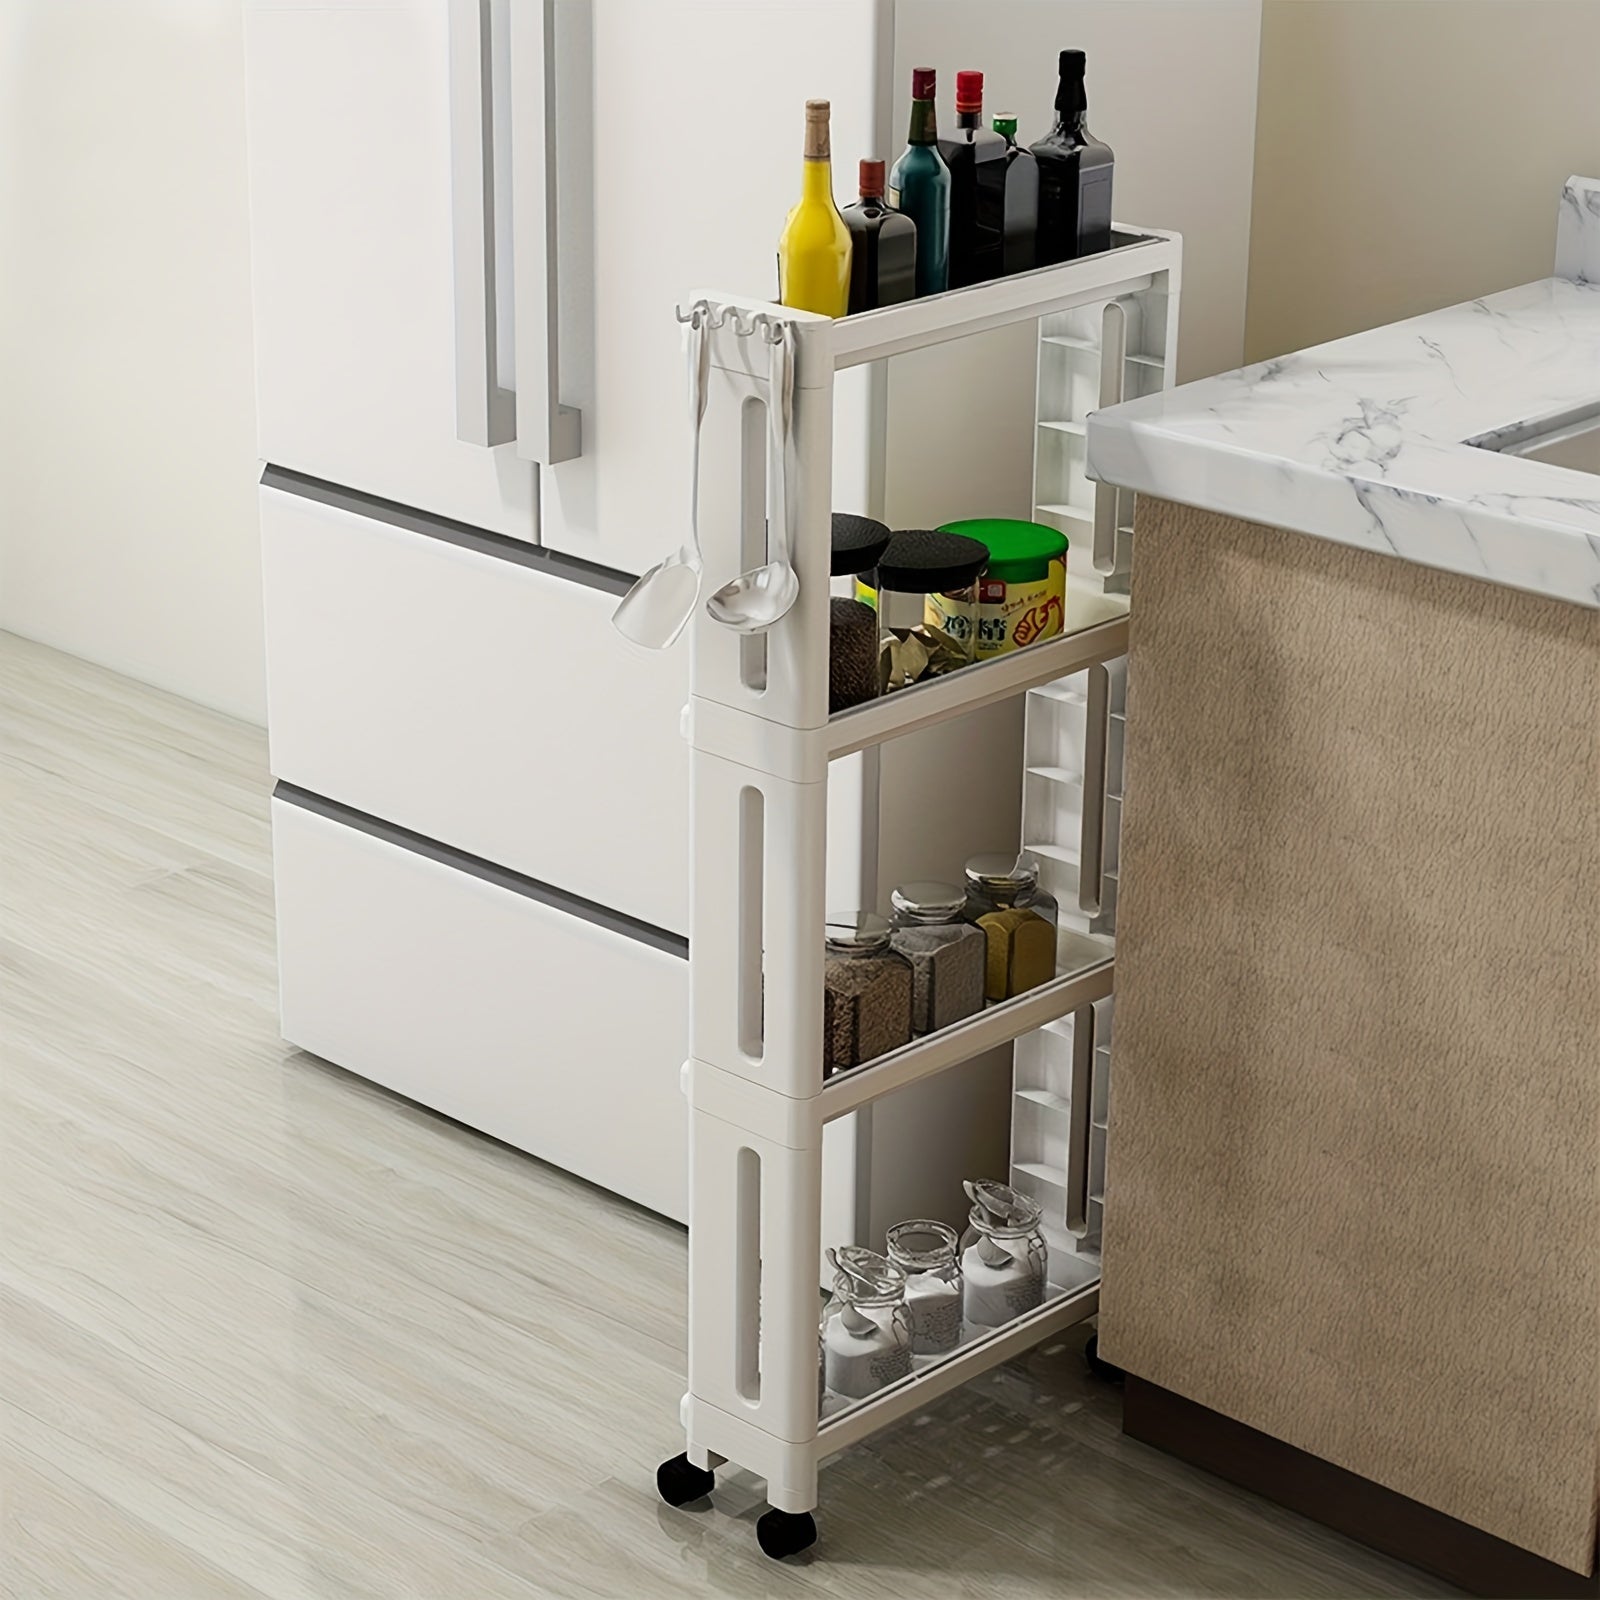 VENETIO Maximize Your Storage Space with this Slim, Multi-Layer, Movable Storage Cart! ➡ SO-00027